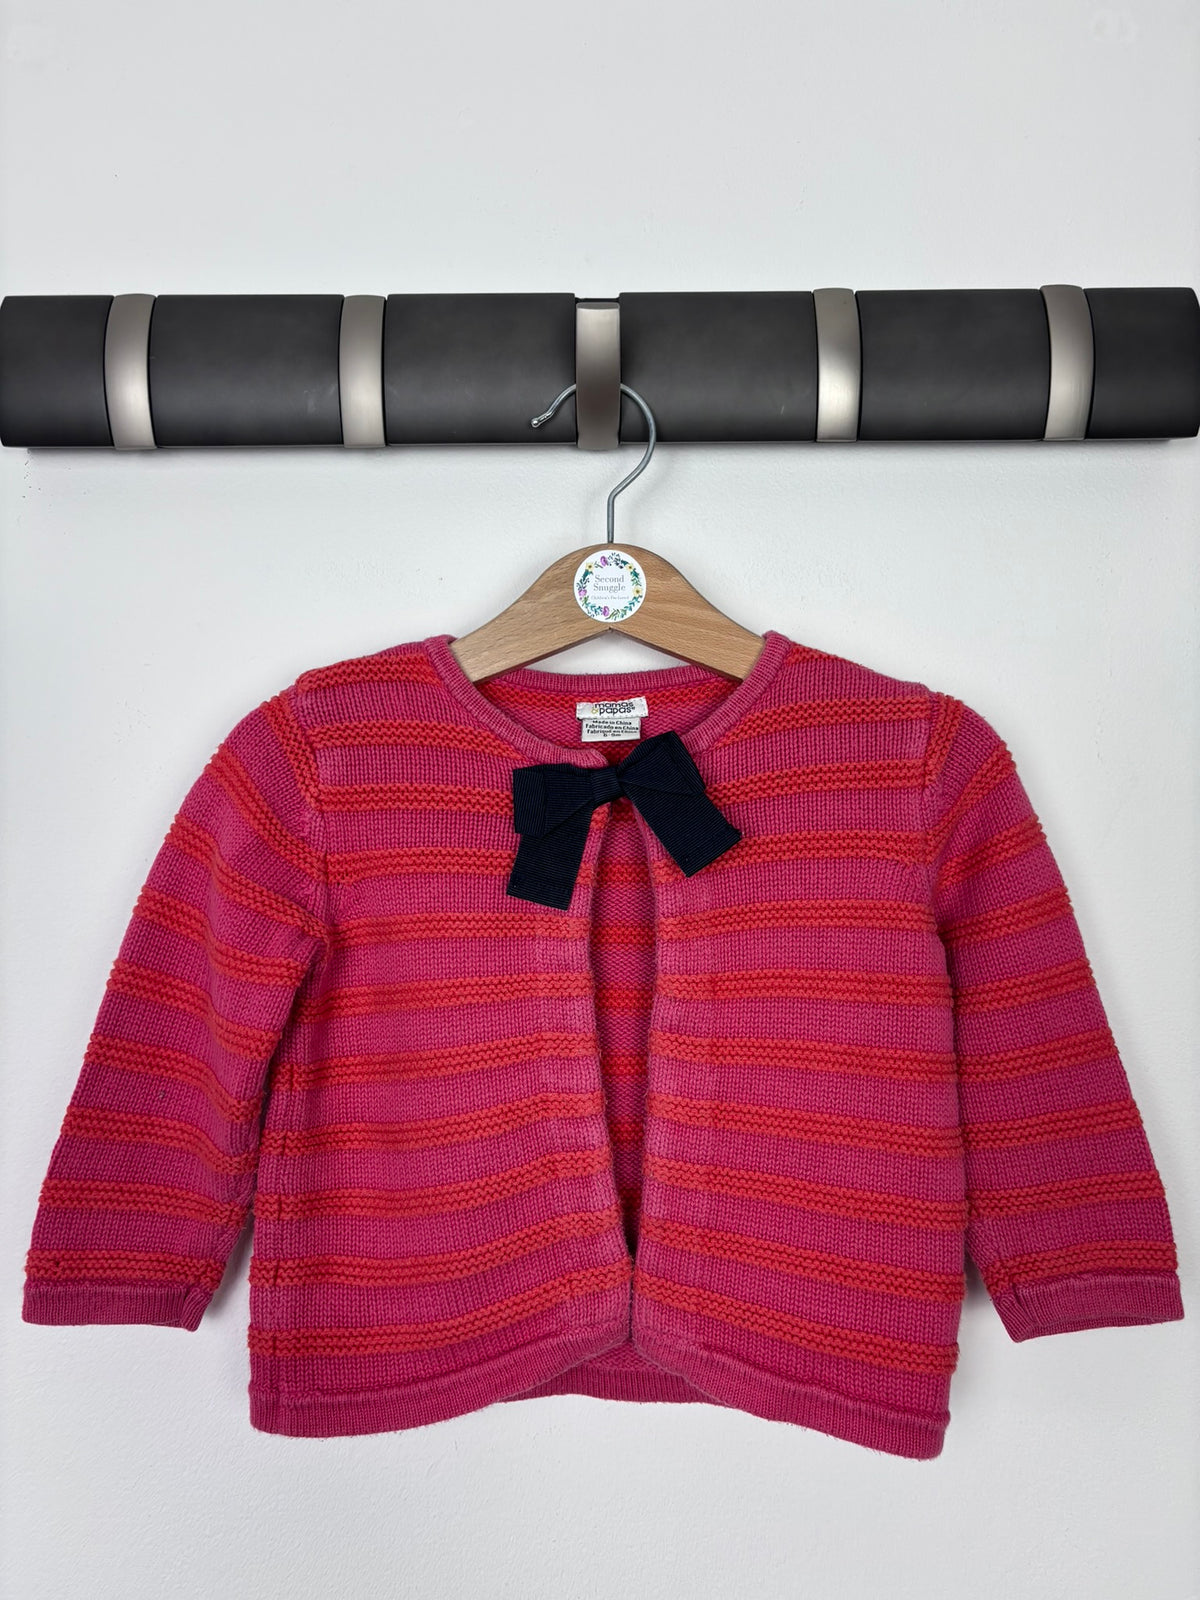 Mamas & Papas 6-9 Months-Cardigans-Second Snuggle Preloved